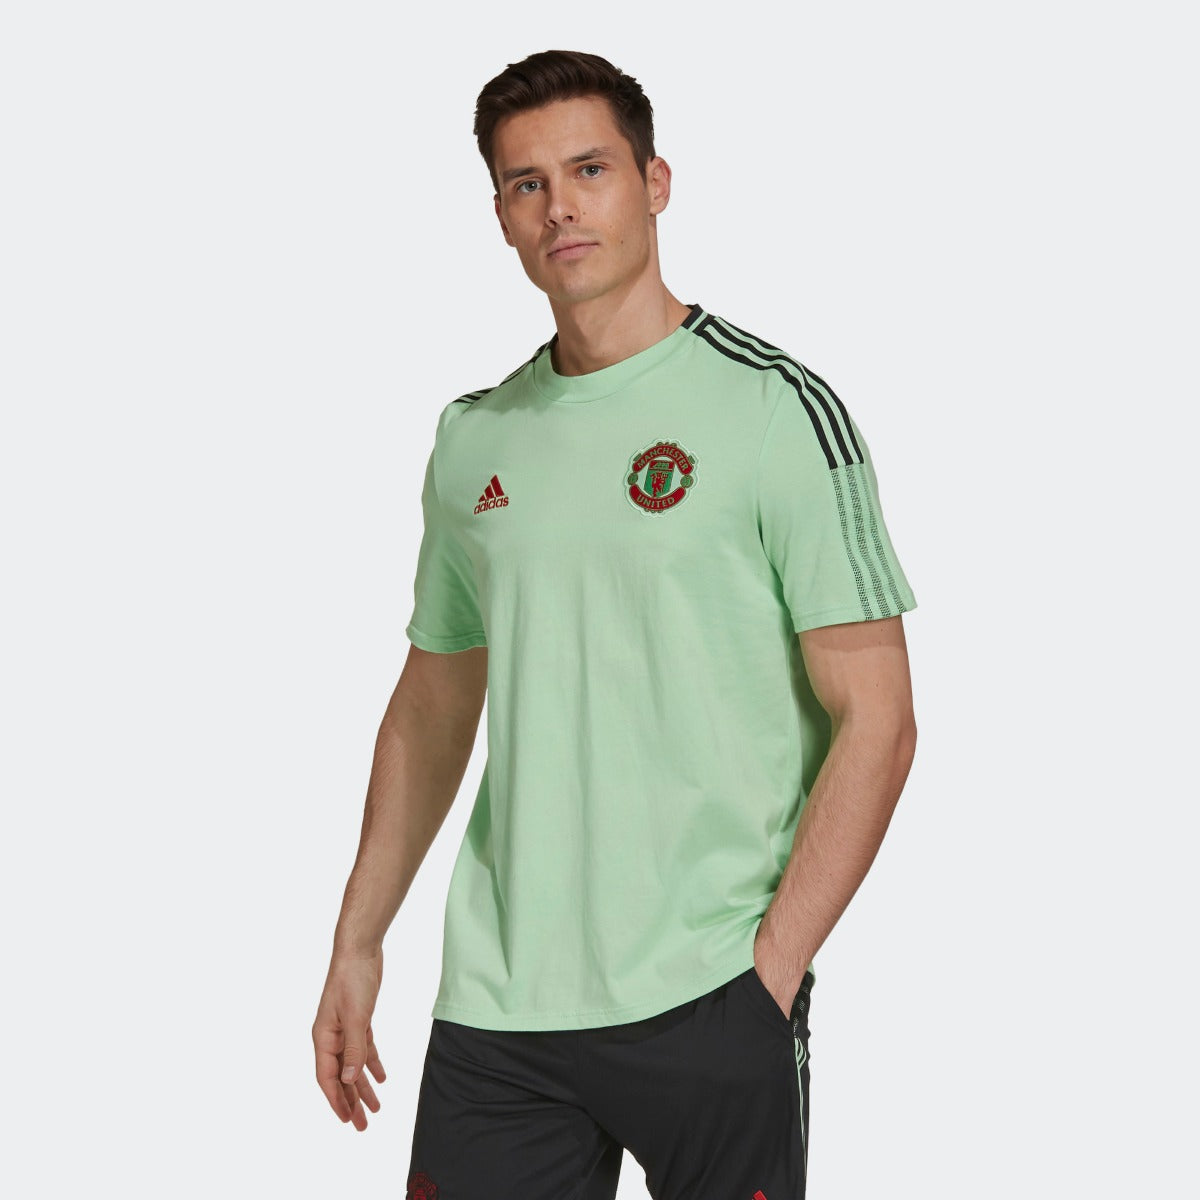 Adidas 2021 Manchester United Tee Shirt - Glory Mint (Model - Front 1)